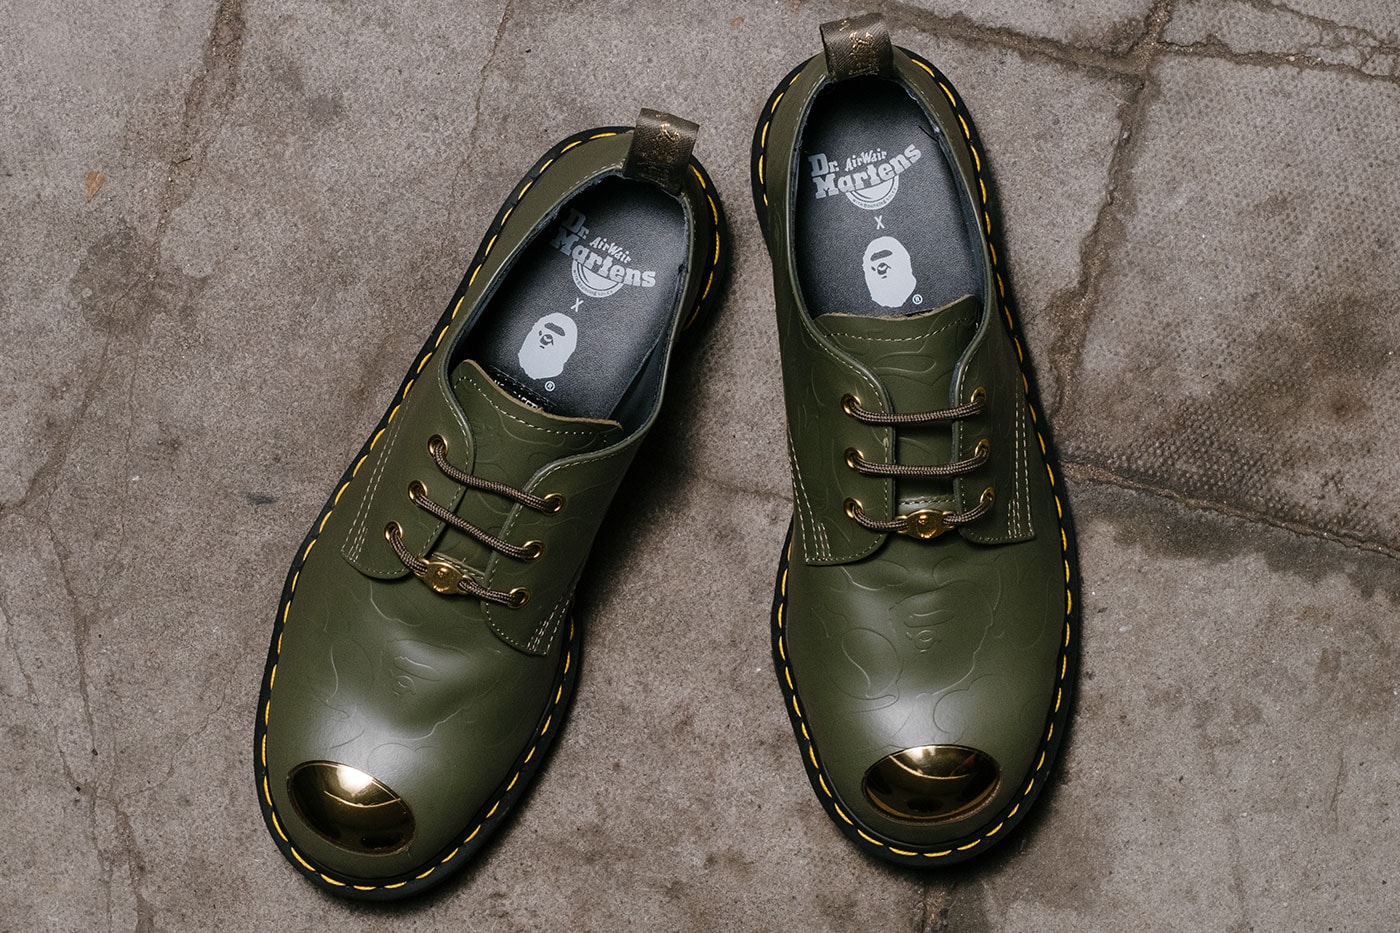 BAPE x Dr. Martens Steel Toe Boots Launch Event lookbook green black leather 10-eye and 3-eye boots